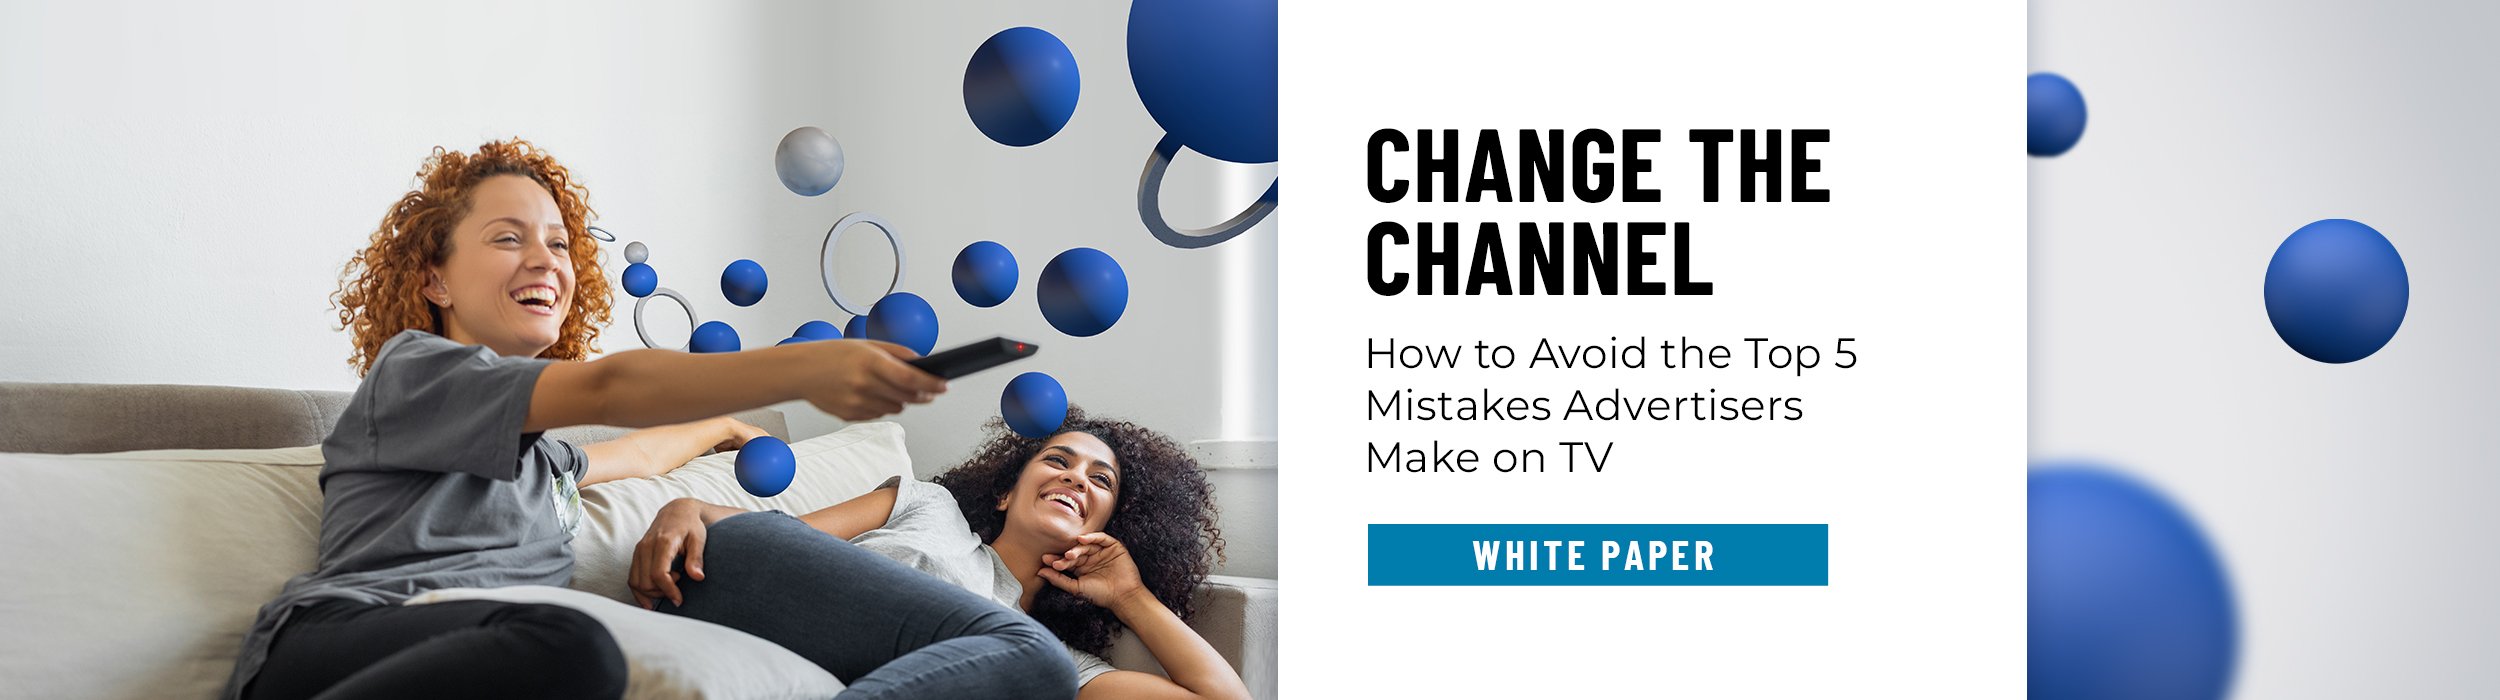 How to Avoid the Top 5 Mistakes Advertisers Make on TV